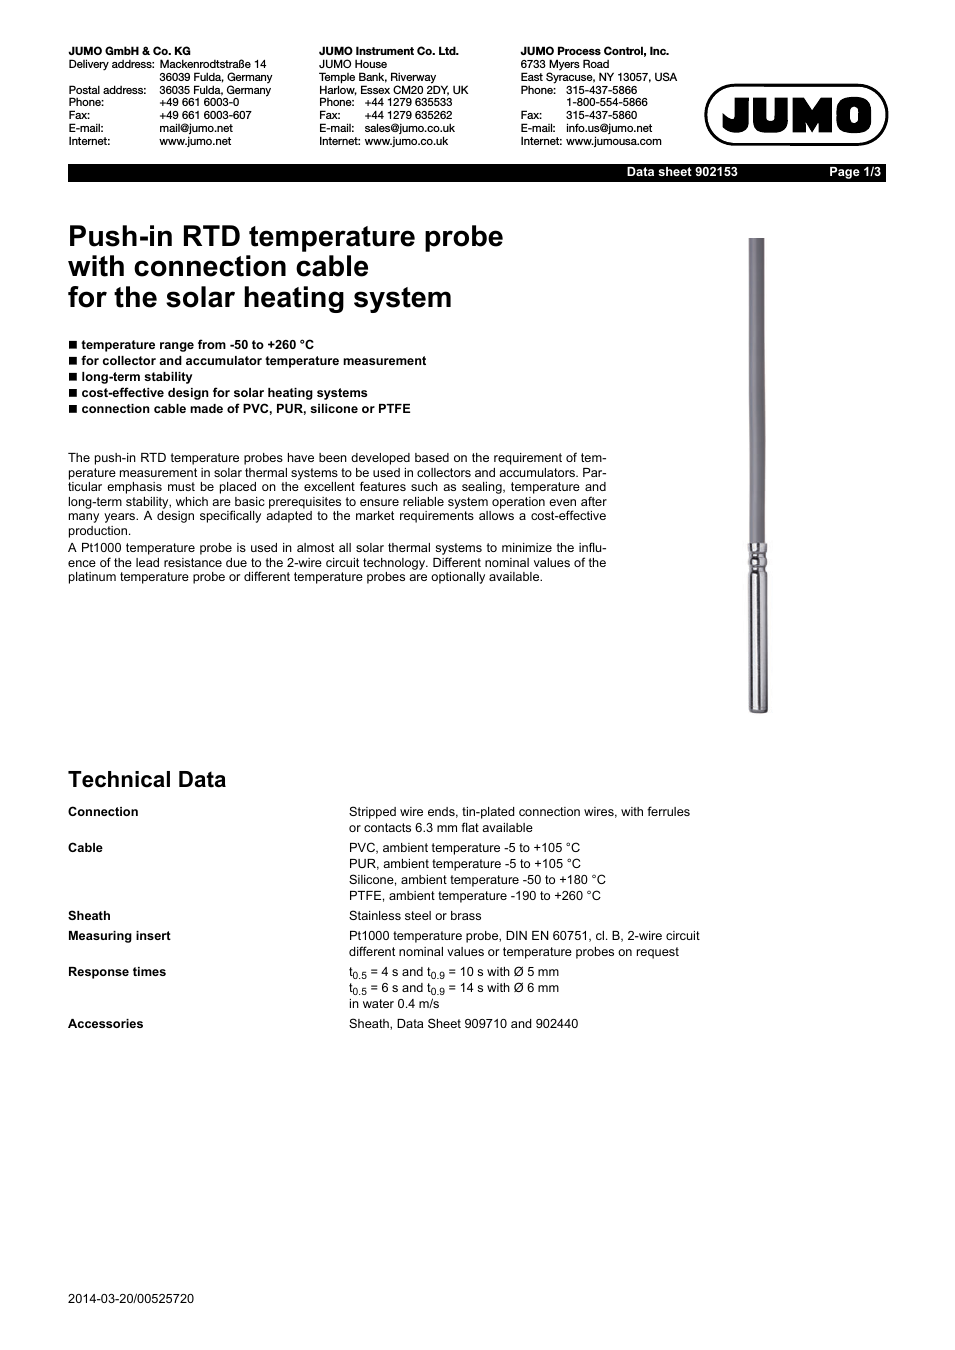 902153 Push-In RTD Temperature Probe with Connecting Cable for Solar Thermal Systems Data Sheet